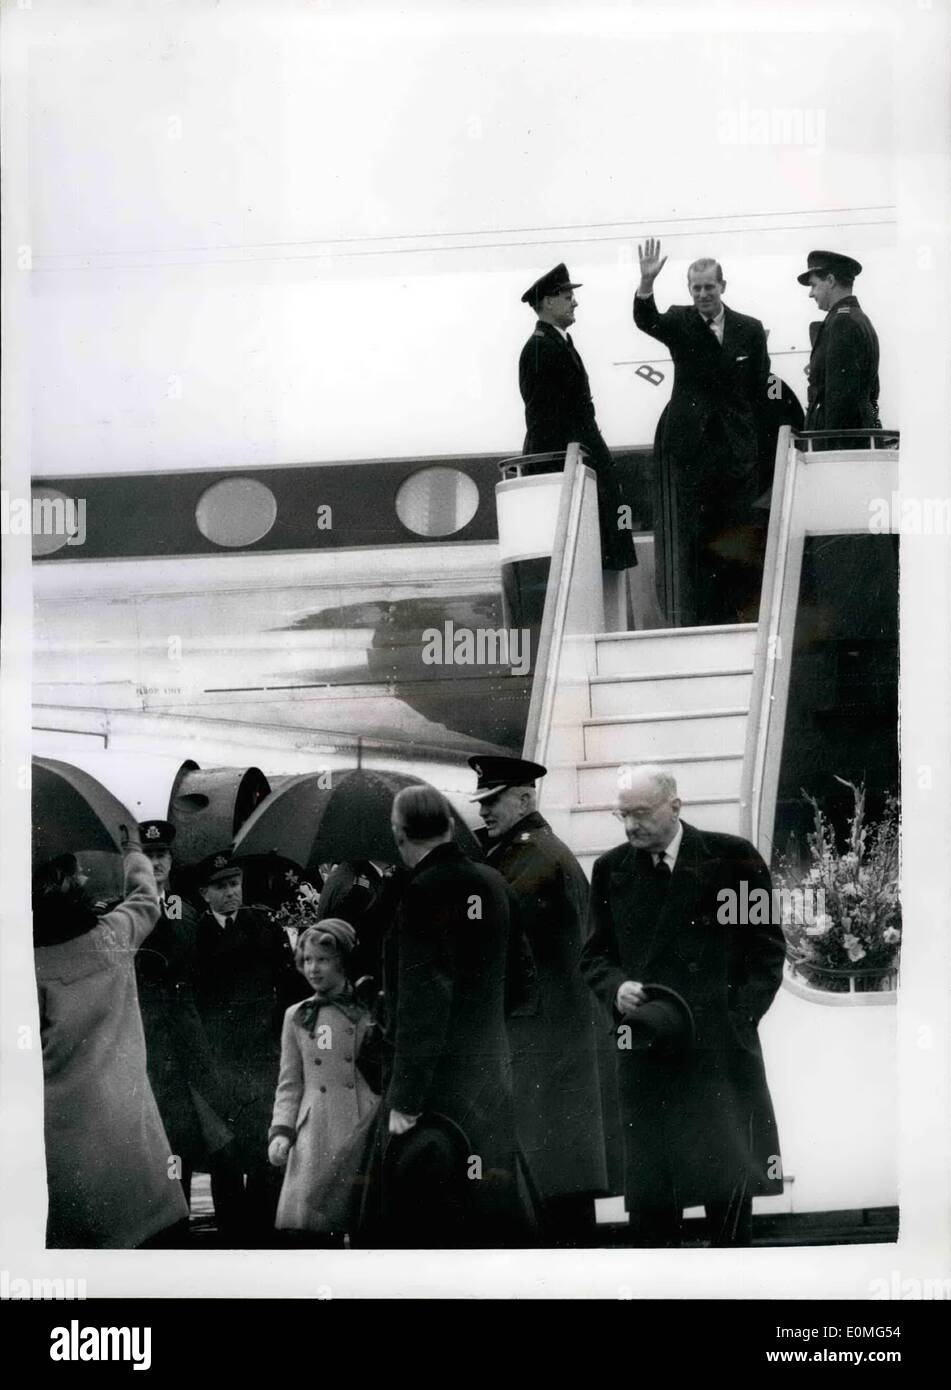 Jan. 01, 1955 - Duke of Edinburgh leaves on world tour wave farewell to each other.. H.M. The Queen with Princess Margaret and Princess Anne went to London Airport this morning to bud farewell to the Duke of Edinburgh who left on his world tour.. Traveling abroad a Comet IV airliner the Duke's first port of call is Delhi via Tripoli and Aden. Photo shows The Duke of Edinburgh waves from the aircraft - as H.M. the queen (bottom left) turne to wave back.. Princess Anne is in the bottom centre looking at her mother this morning. Stock Photo